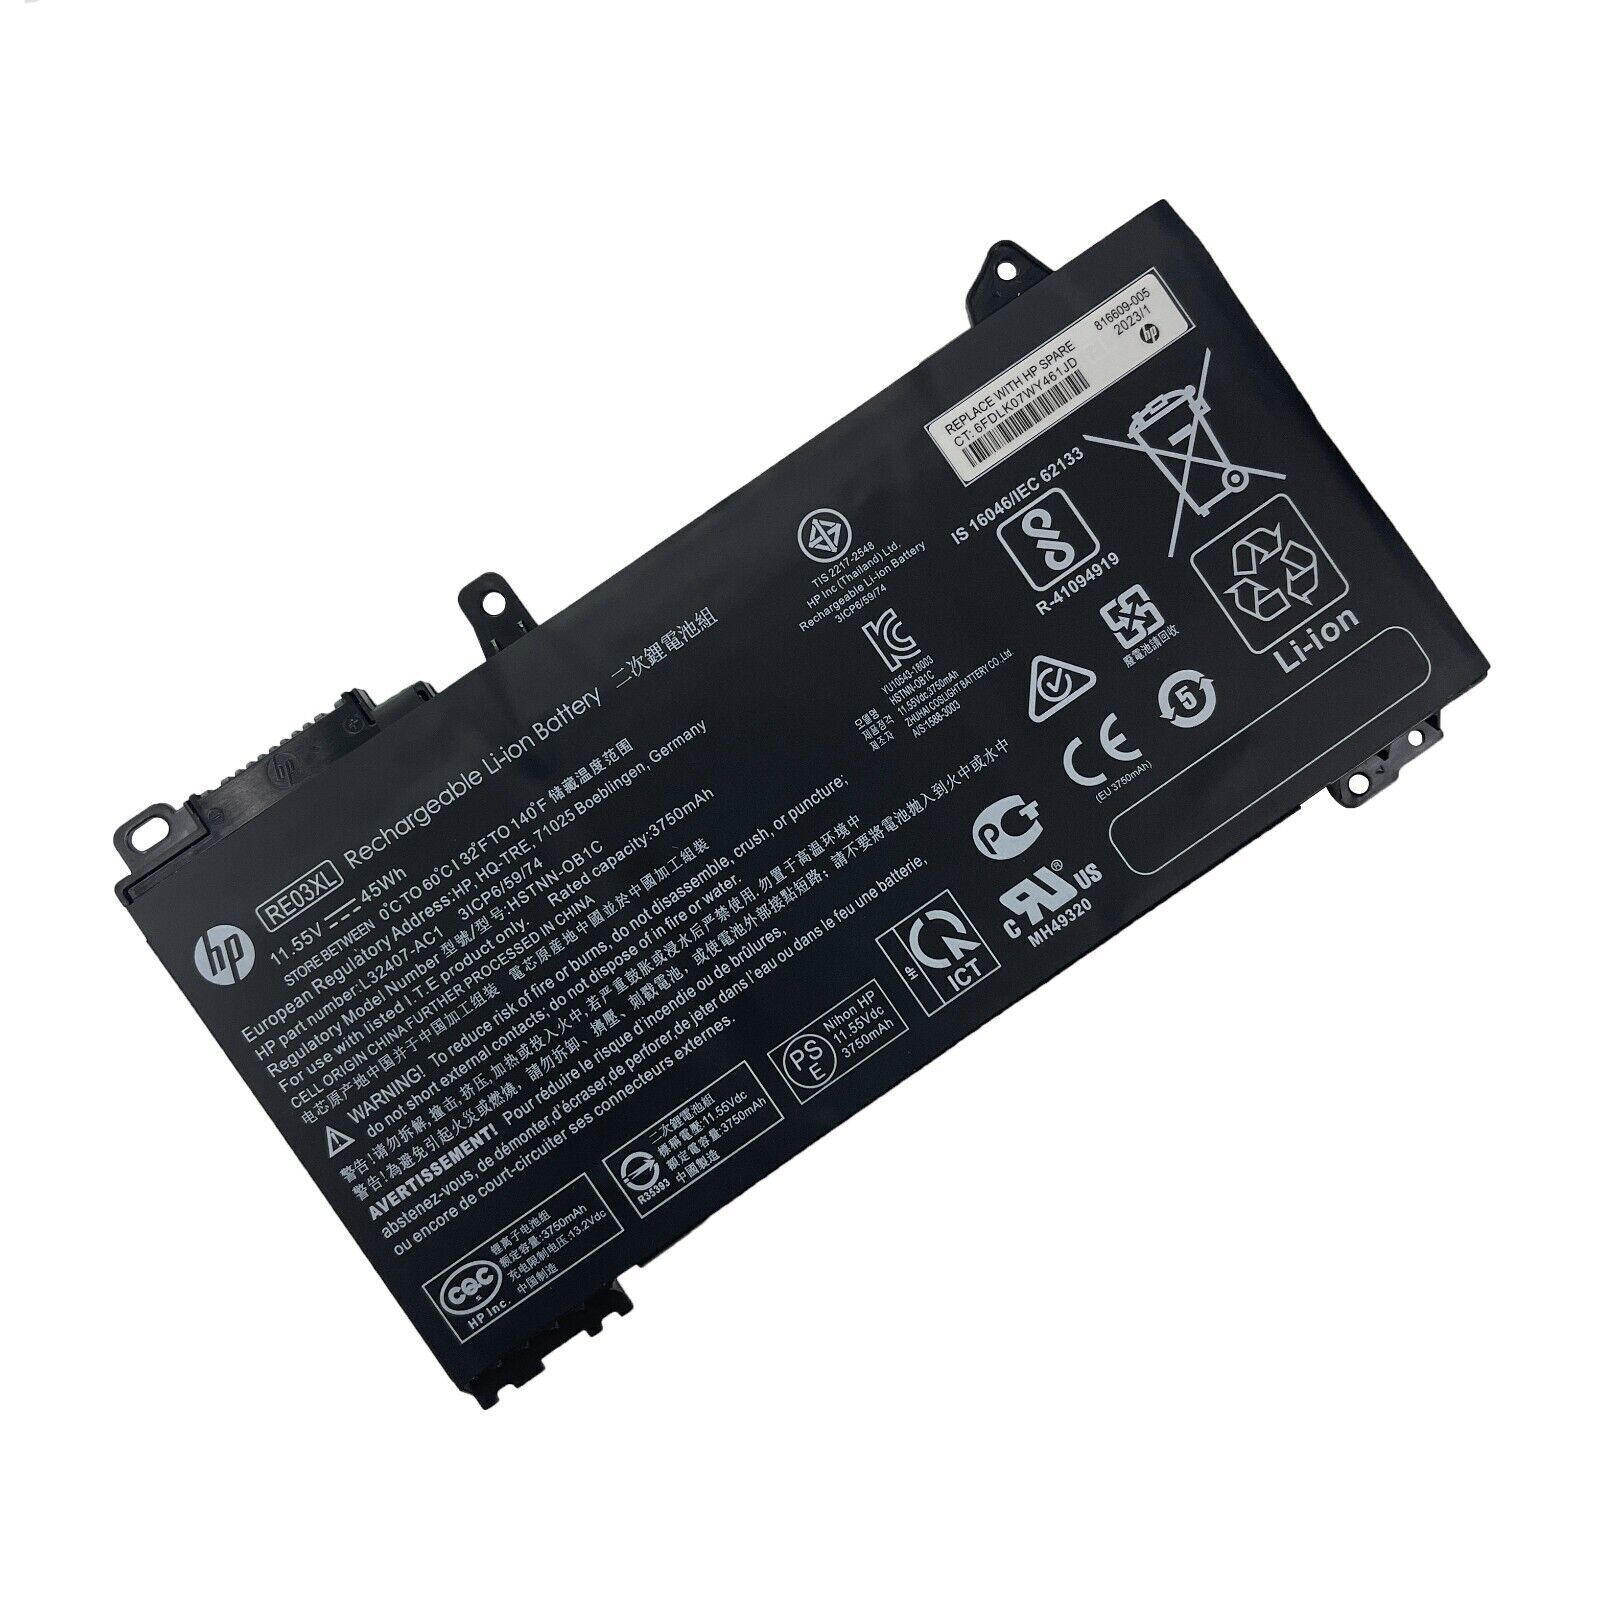 NEW OEM 45Wh RE03XL Battery for HP ProBook 430 440 445 450 455 G6 HSTNN-DB9A US